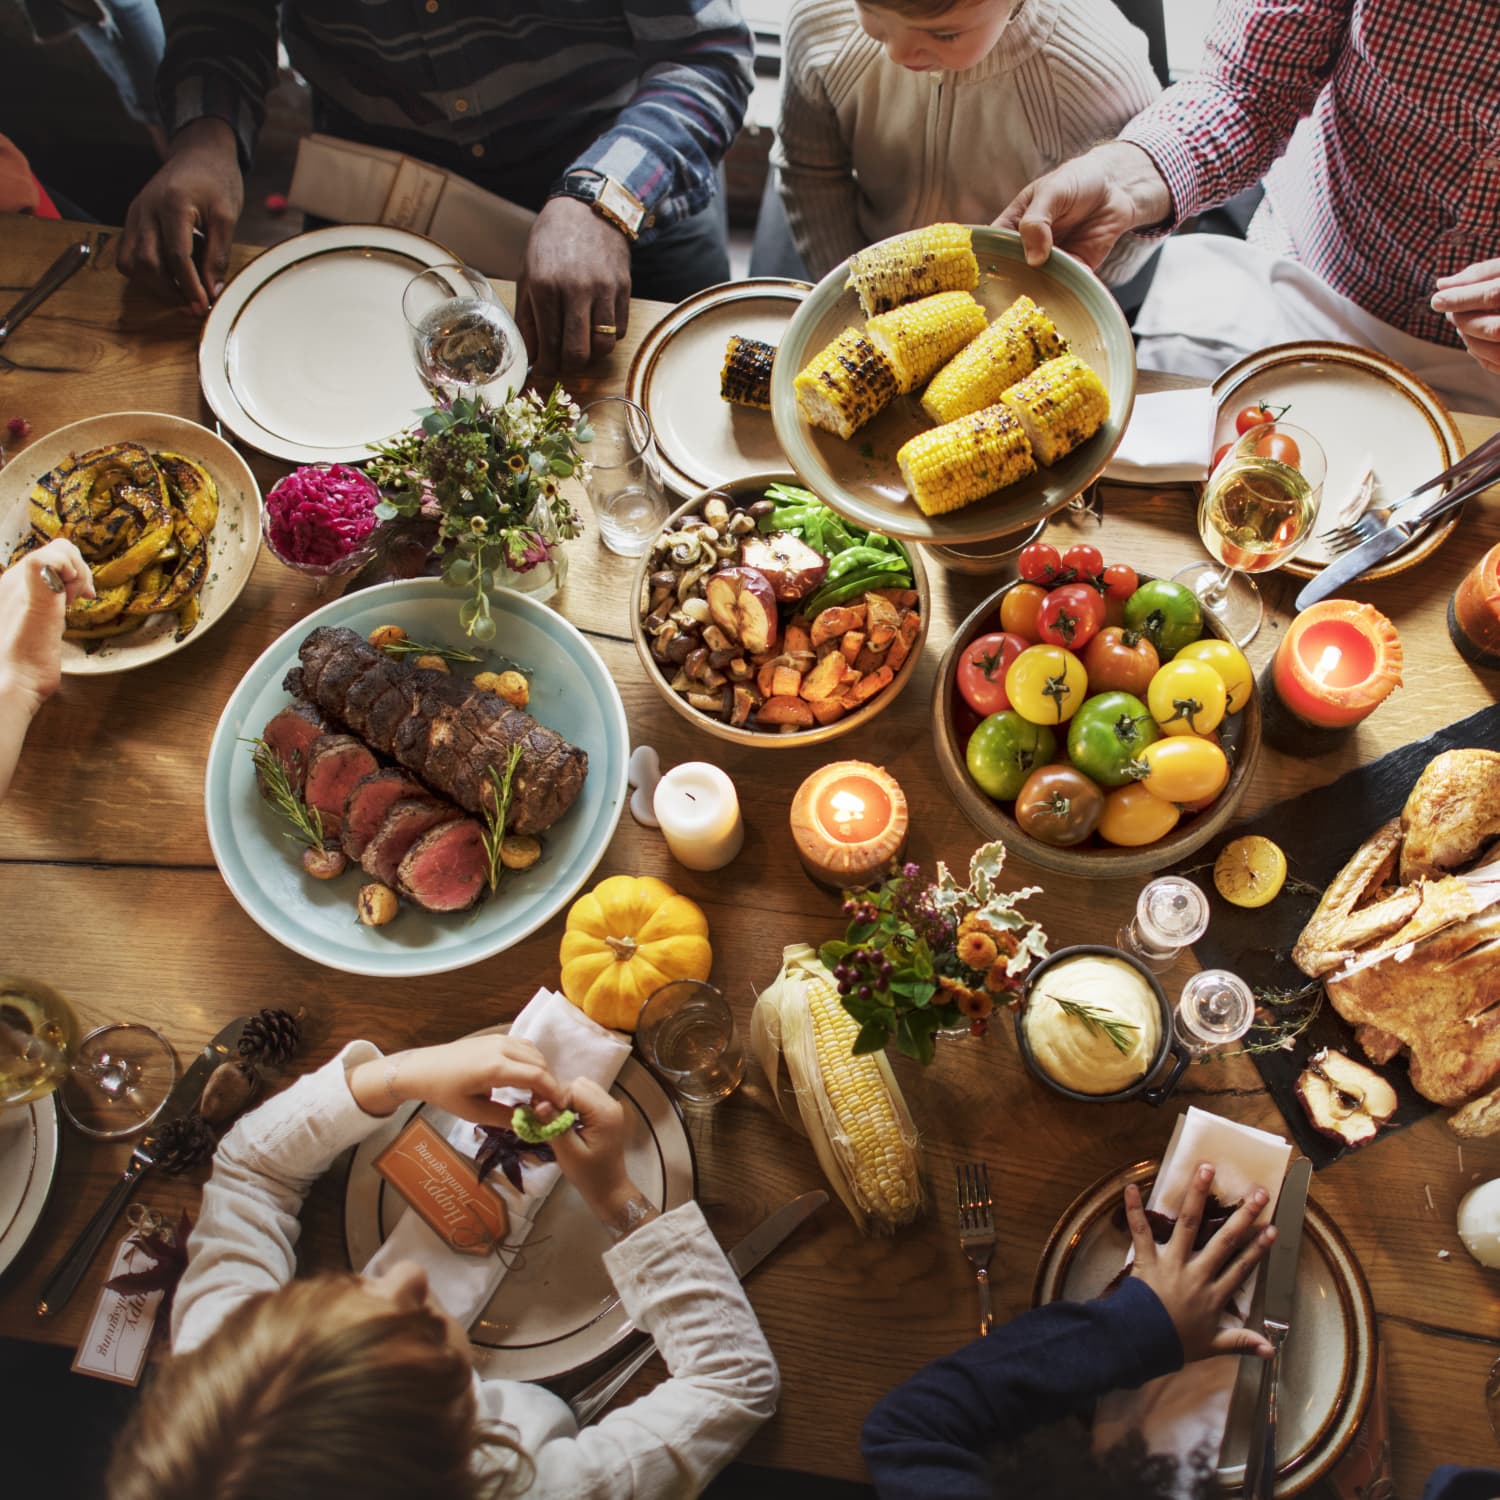 5 Tips I Learned from Hosting 23 People for Thanksgiving in My